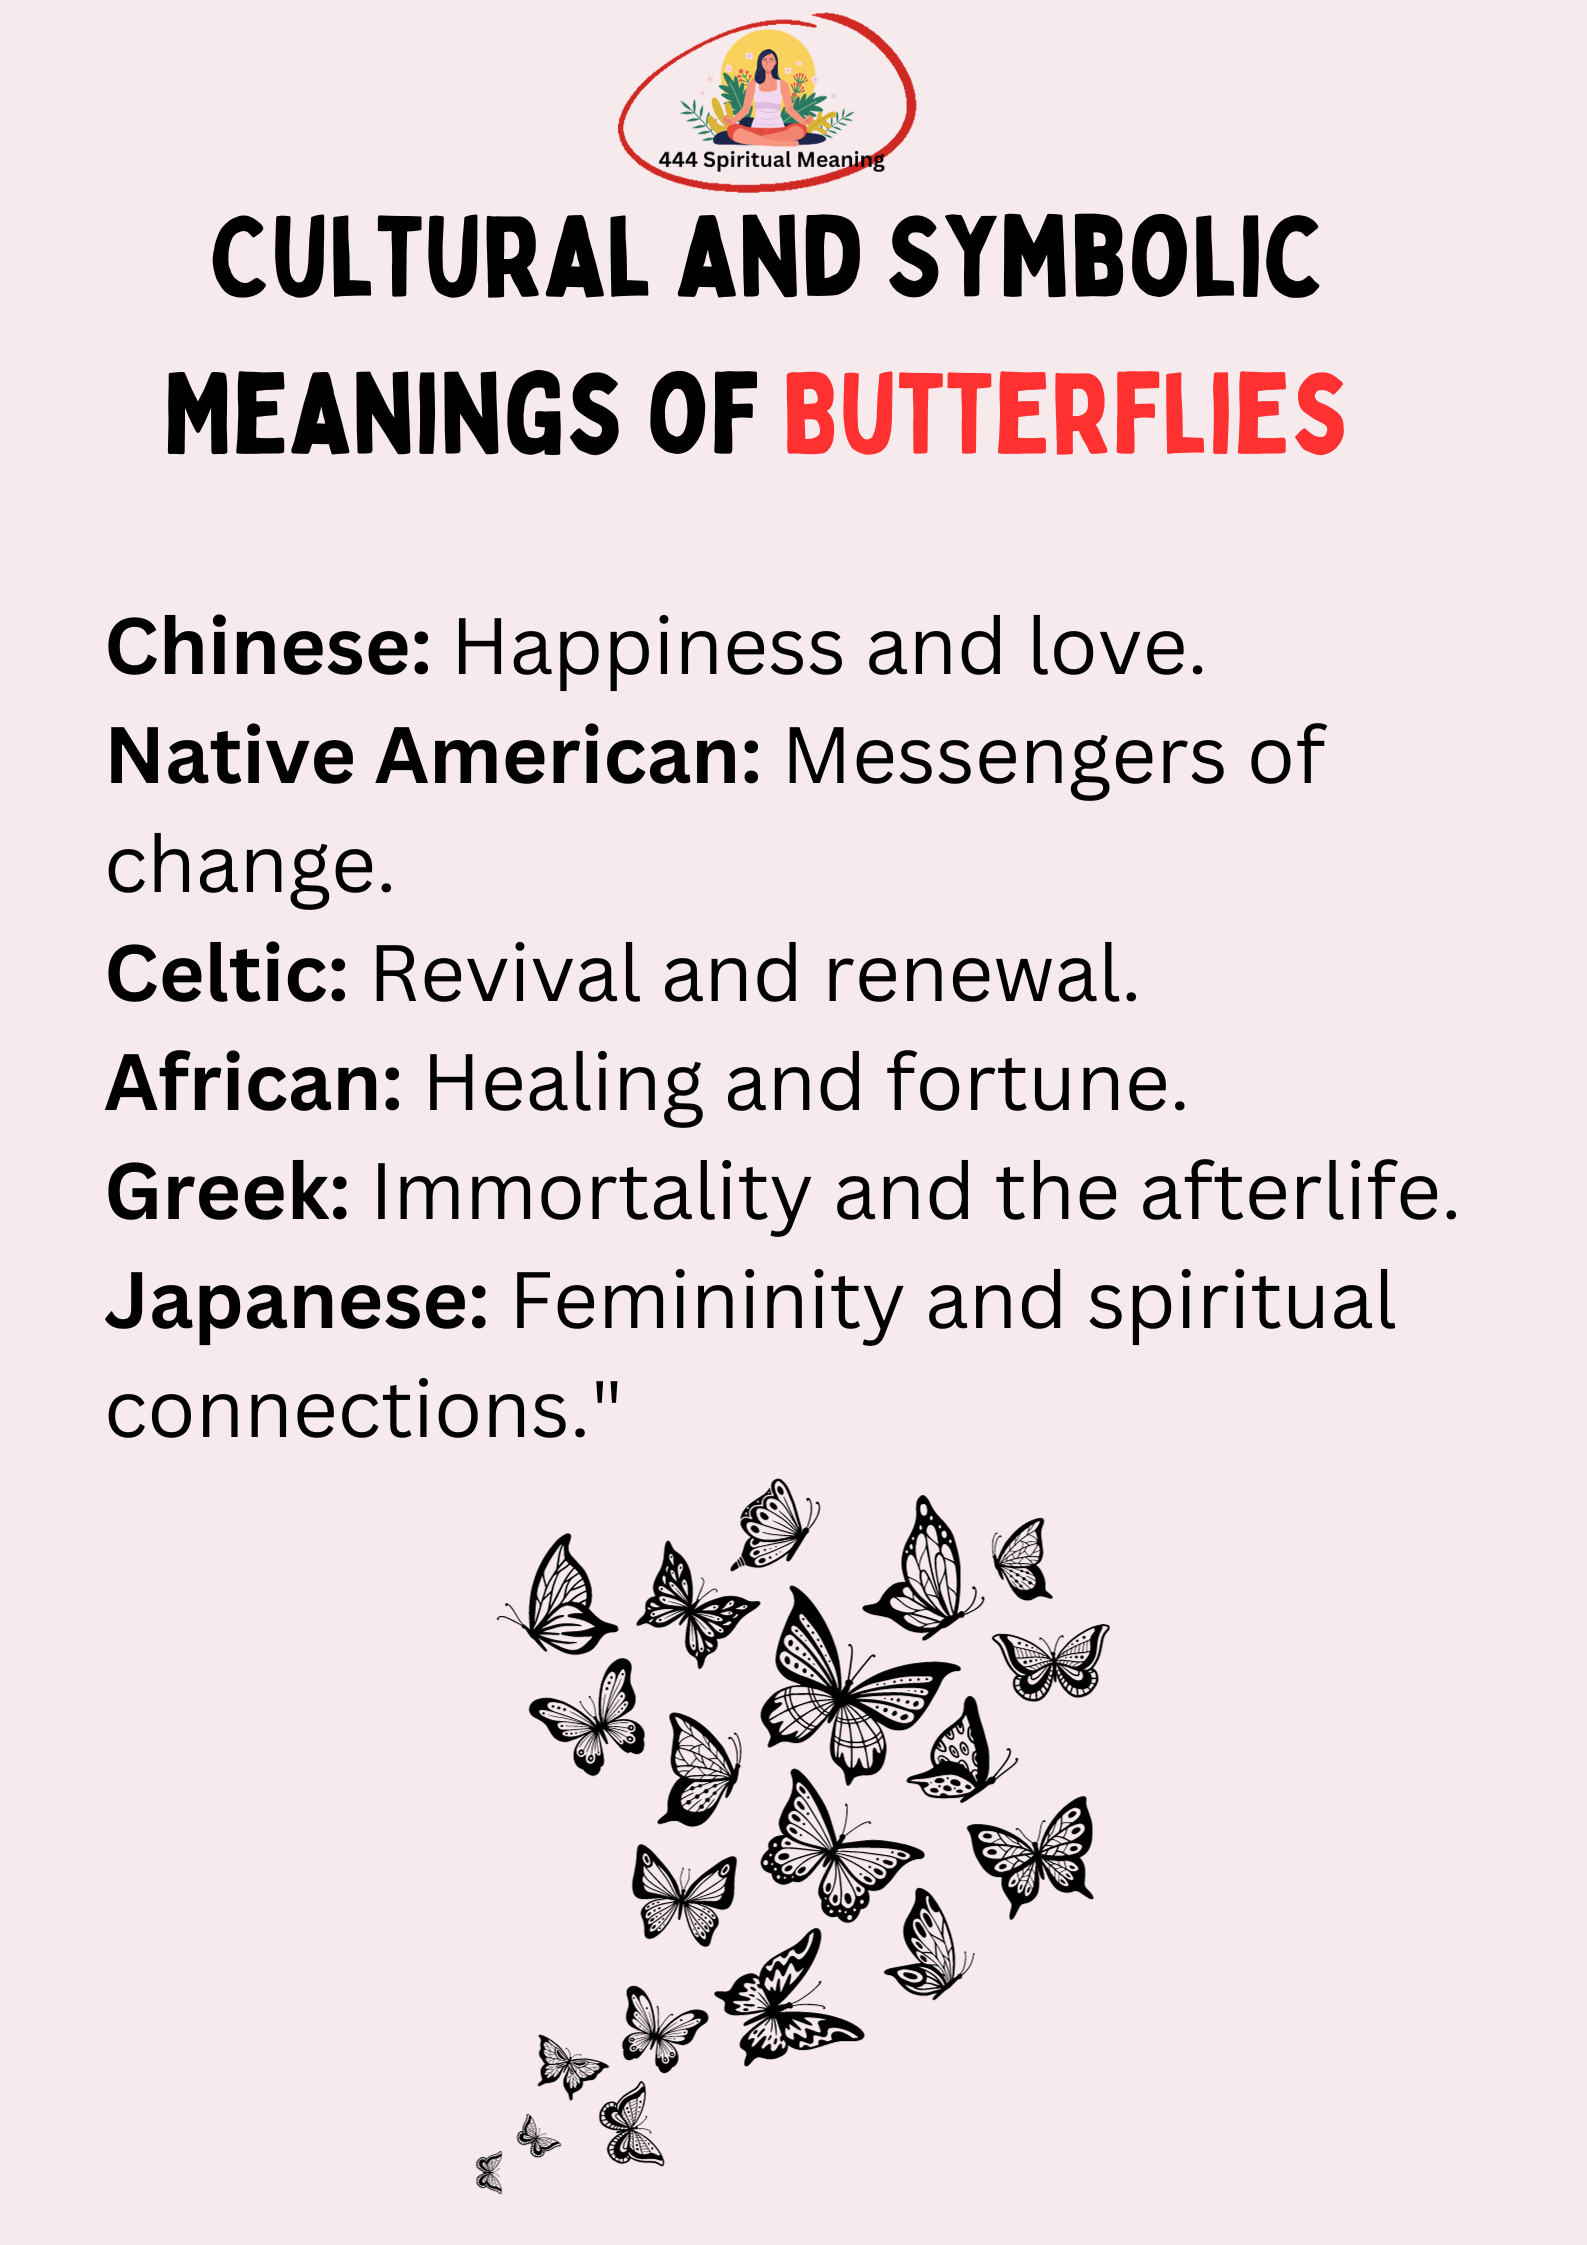 Chinese: Happiness and love.
Native American: Messengers of change.
Celtic: Revival and renewal.
African: Healing and fortune.
Greek: Immortality and the afterlife.
Japanese: Femininity and spiritual connections."

